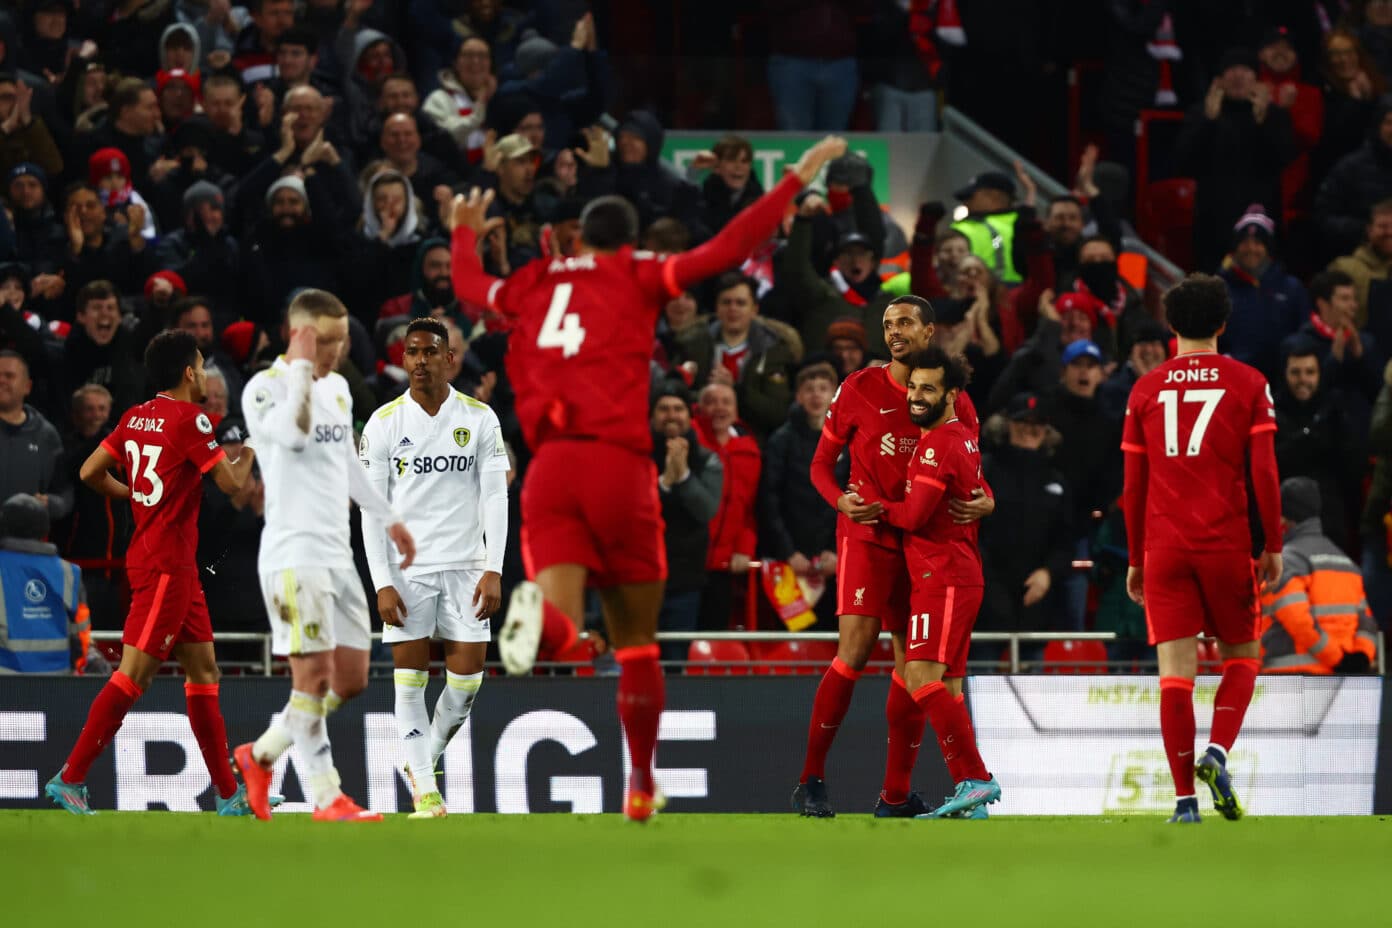 Liverpool 6-0 Leeds United - Watch the goals and highlights (Video) - LFC  Globe